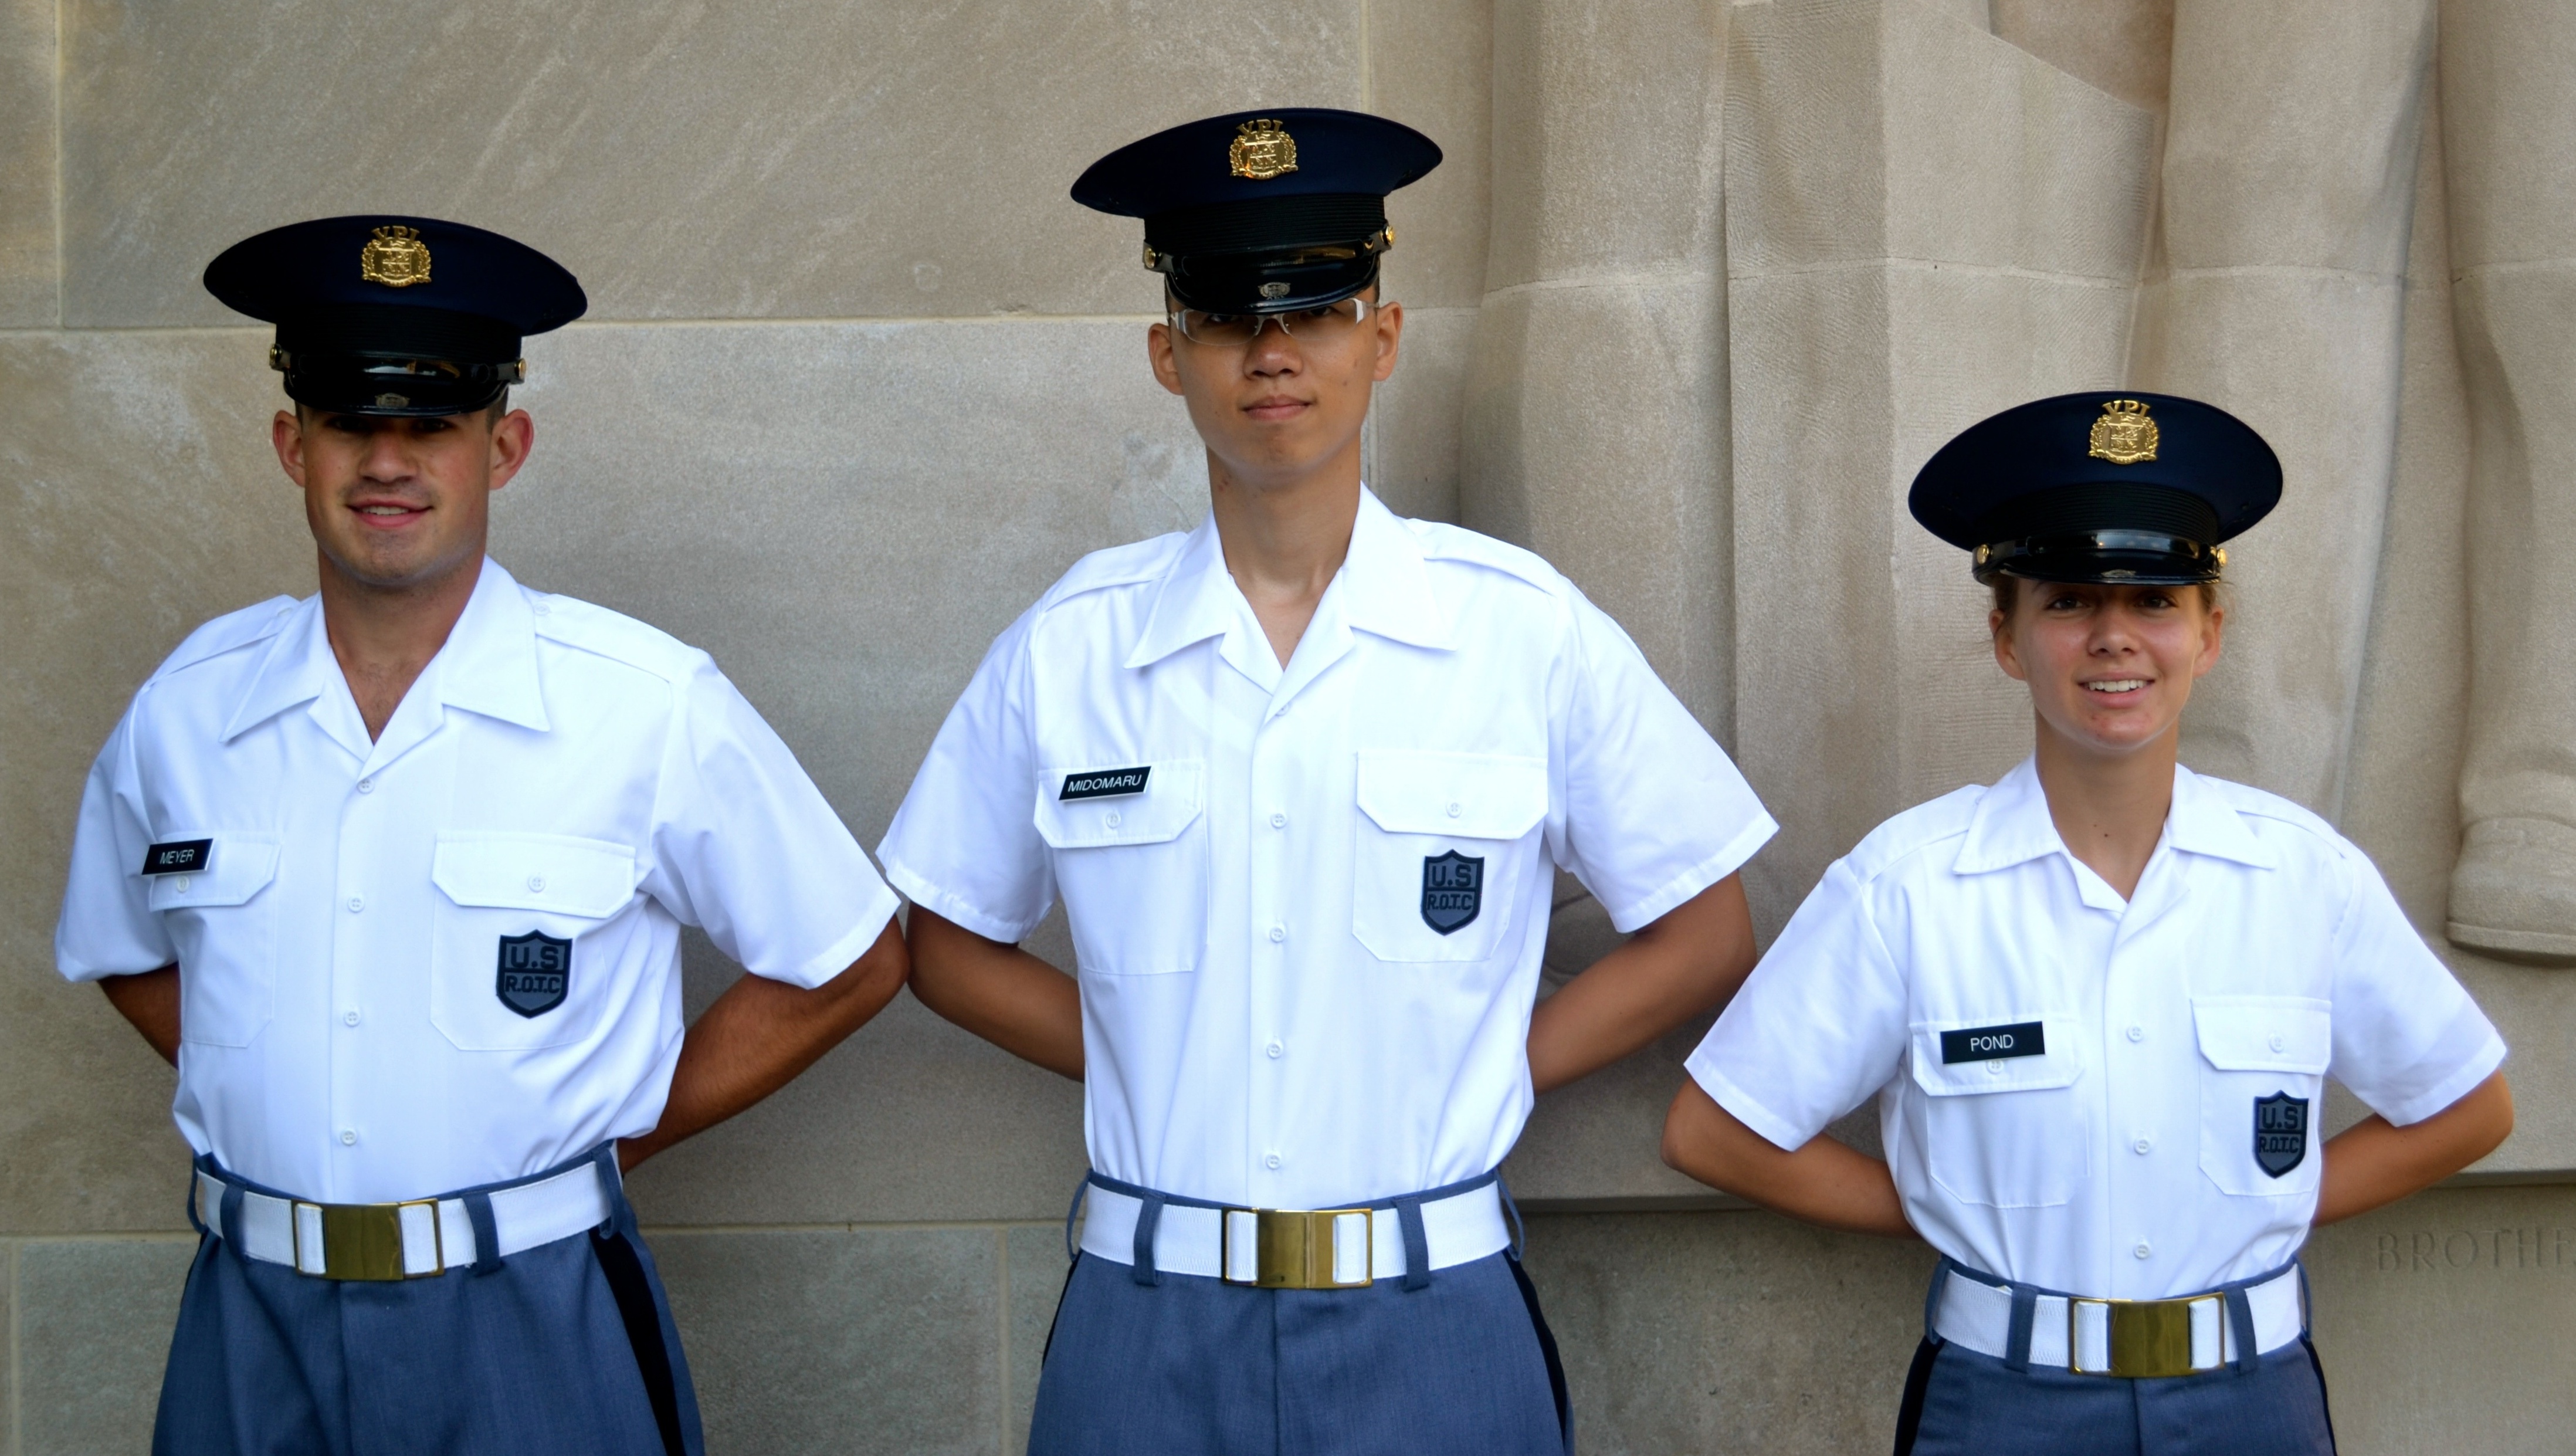 From left to right are Cadets Thomas Meyer, Ronald Midomaru, and Joelle Pond standing in front of the Brotherhood Pylon.